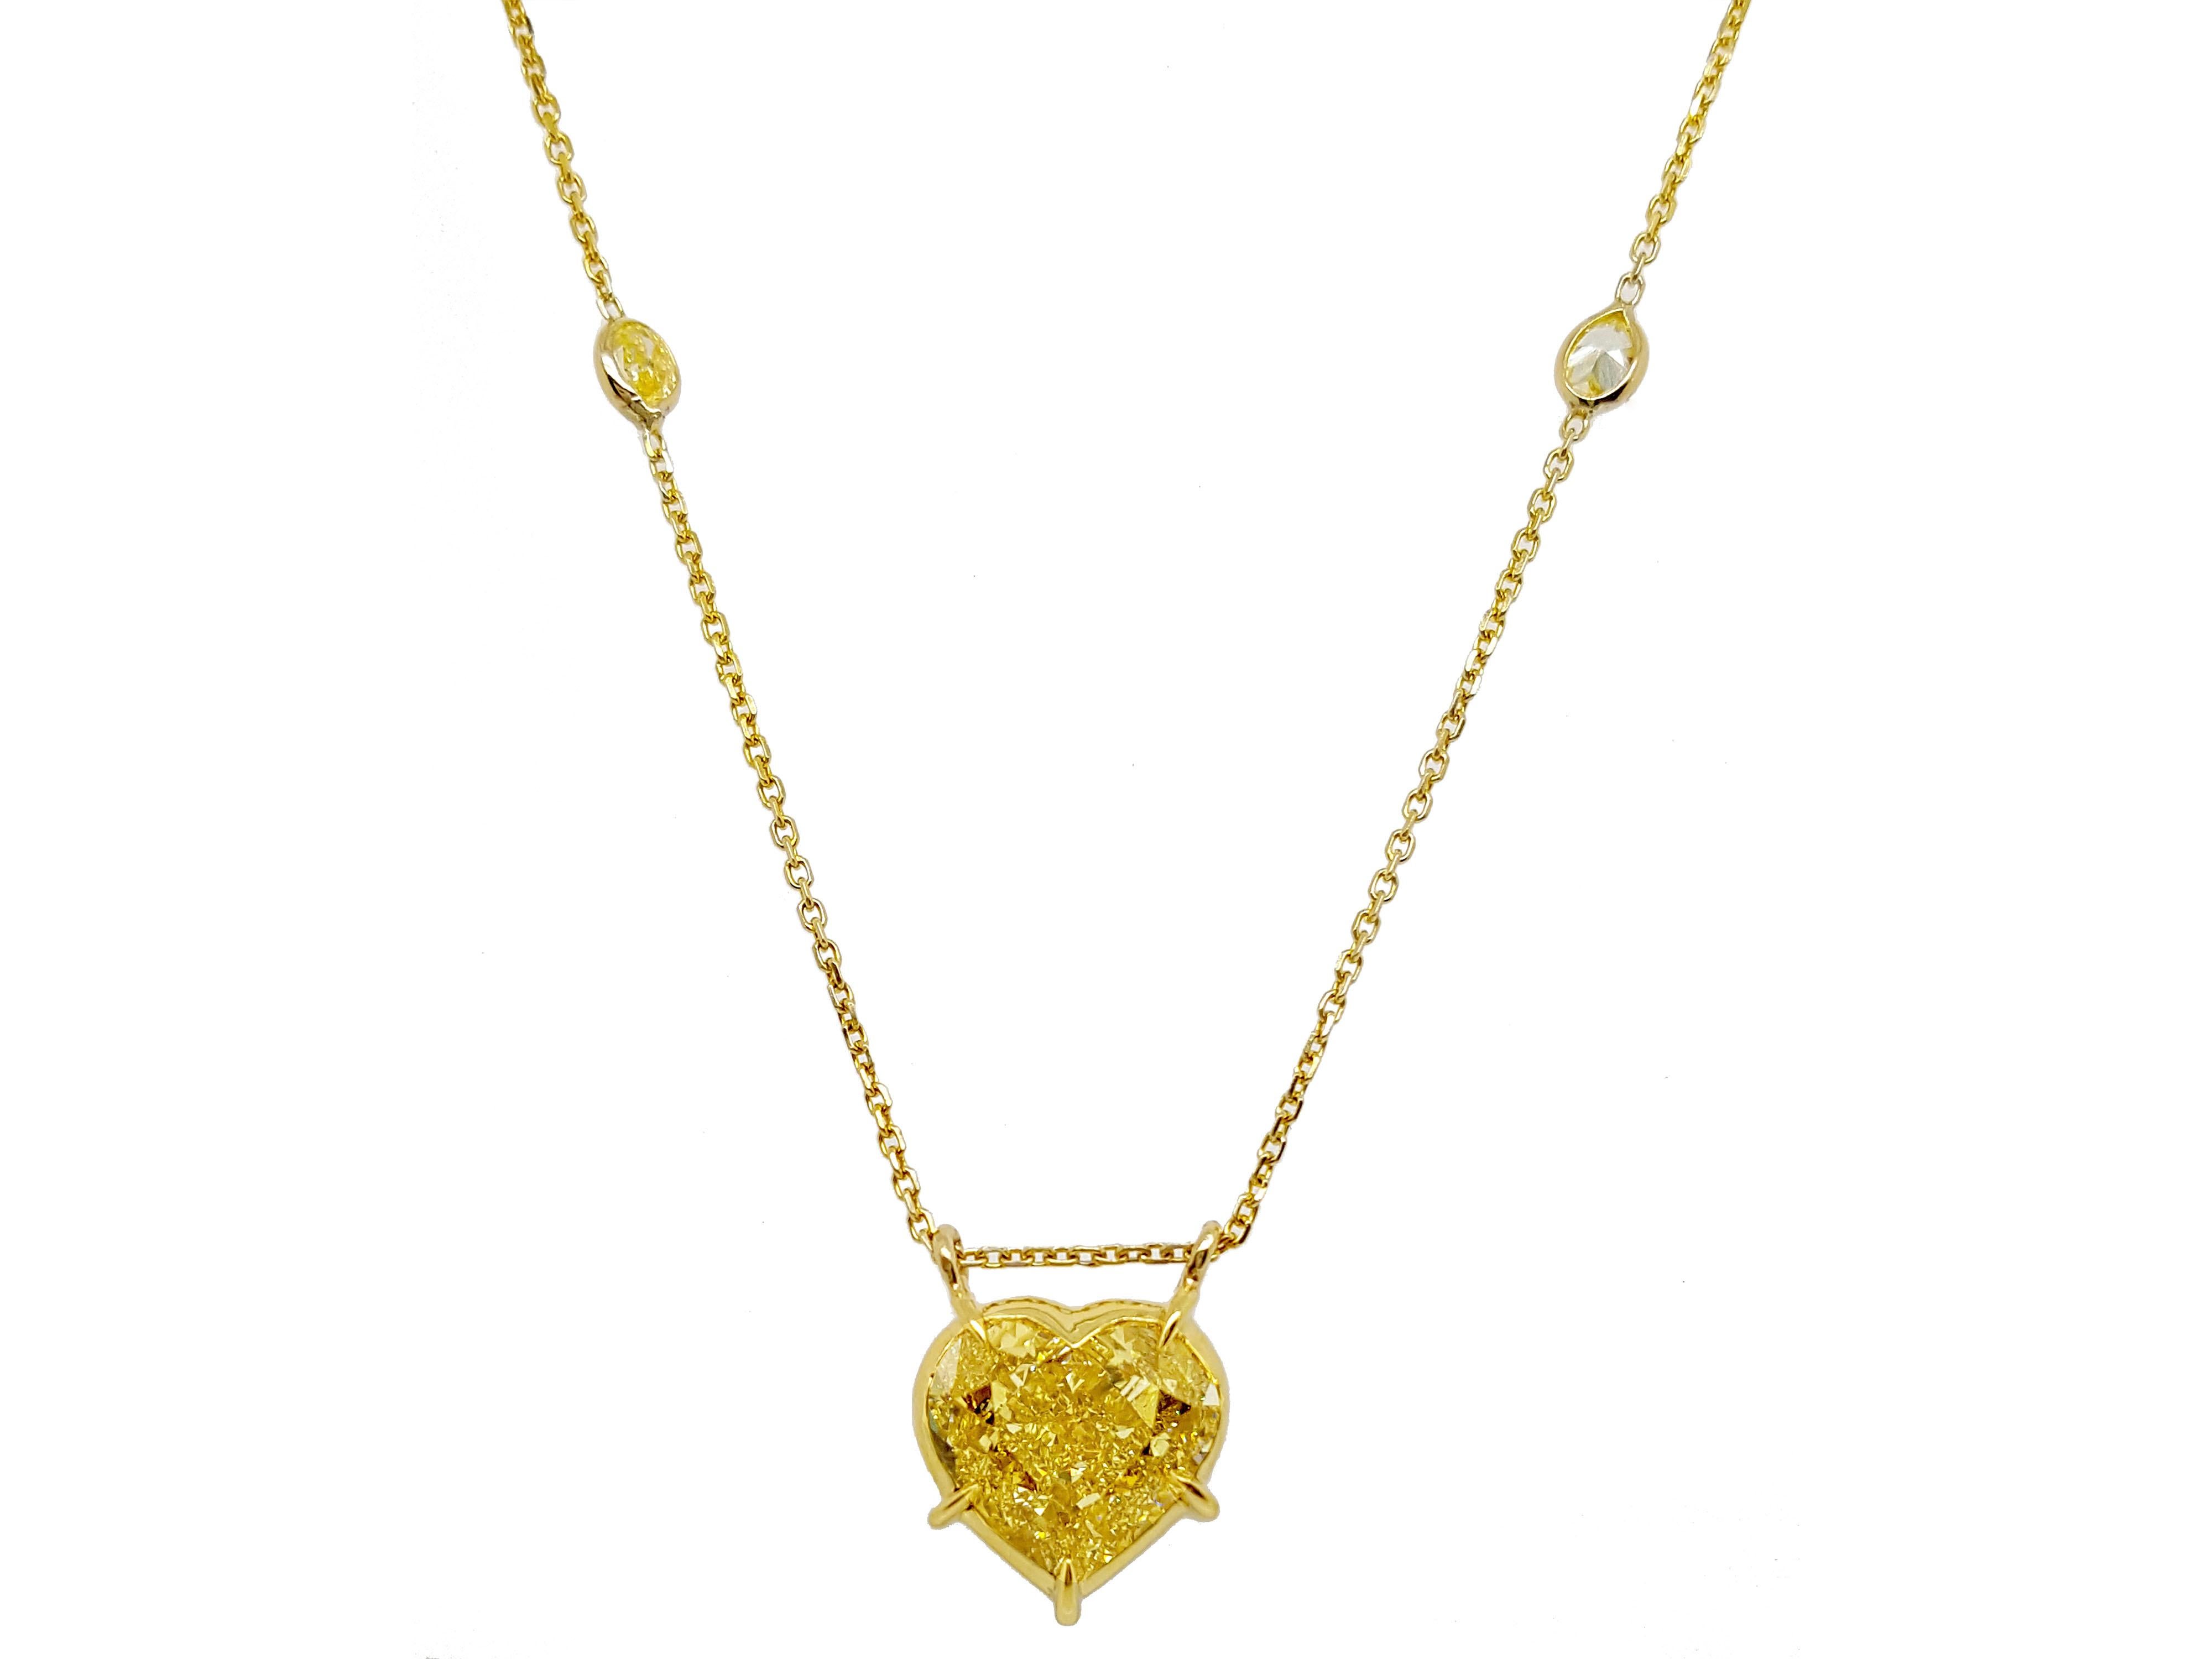 Contemporary 5 Carat Fancy Yellow Diamond Heart-Shaped Necklace 18K Yellow Gold GIA Certified For Sale